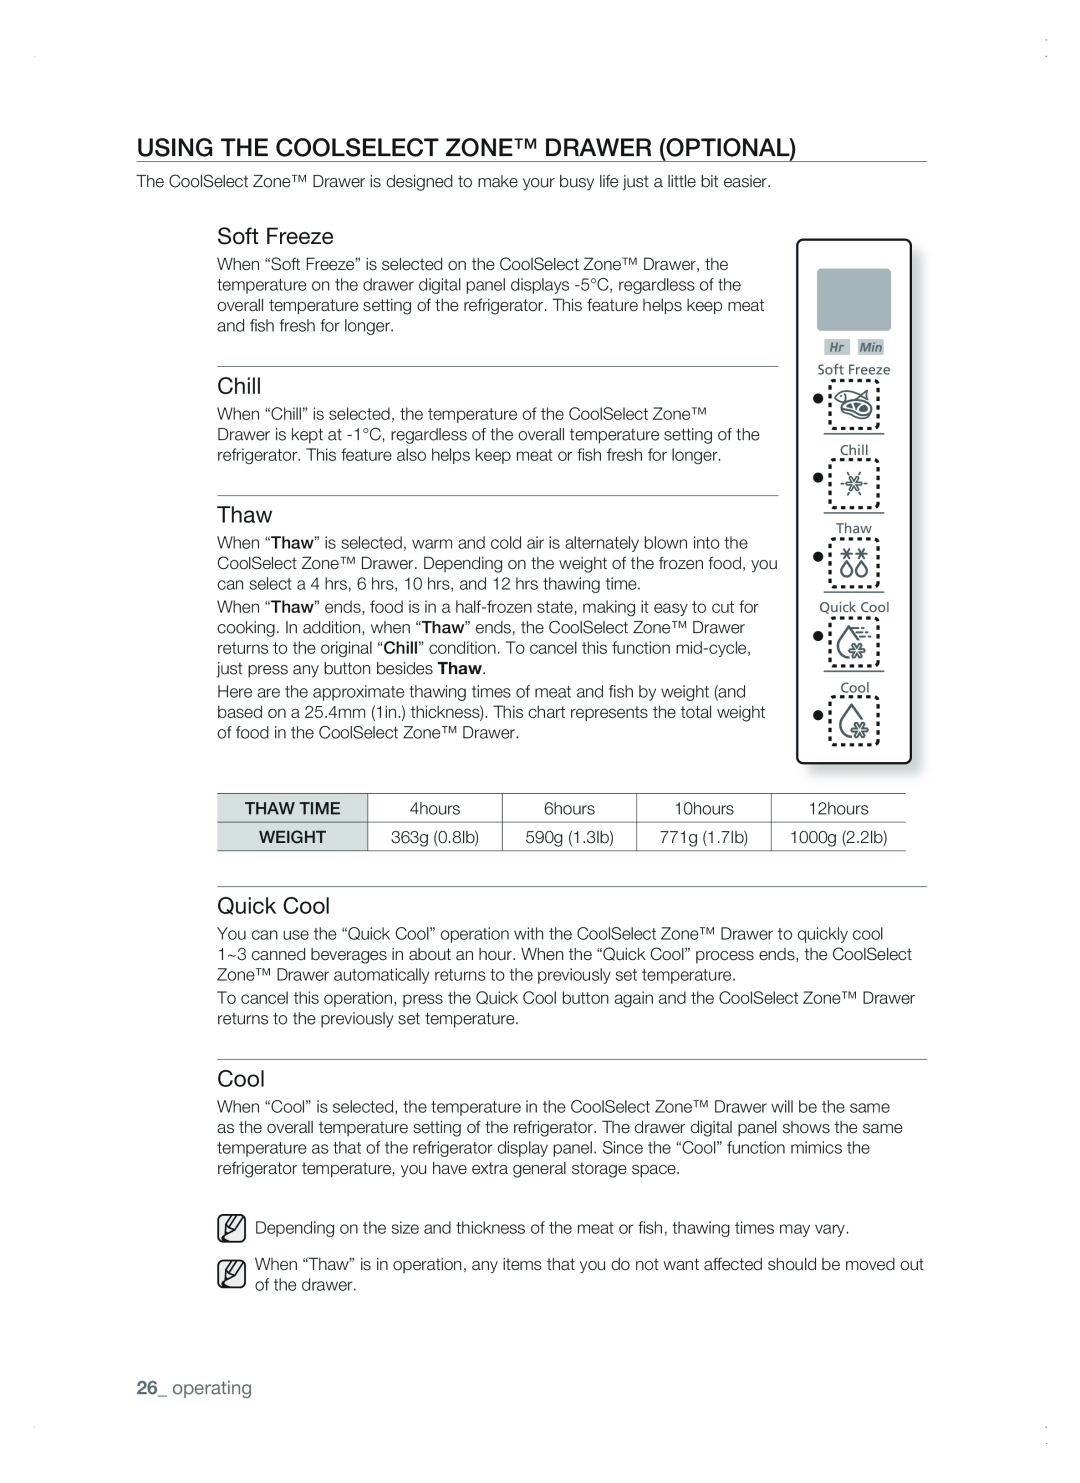 Samsung RSG5 user manual Using the CoolSelect Zone Drawer OPTIONAL, Soft Freeze, Chill, Thaw, Quick Cool, operating 